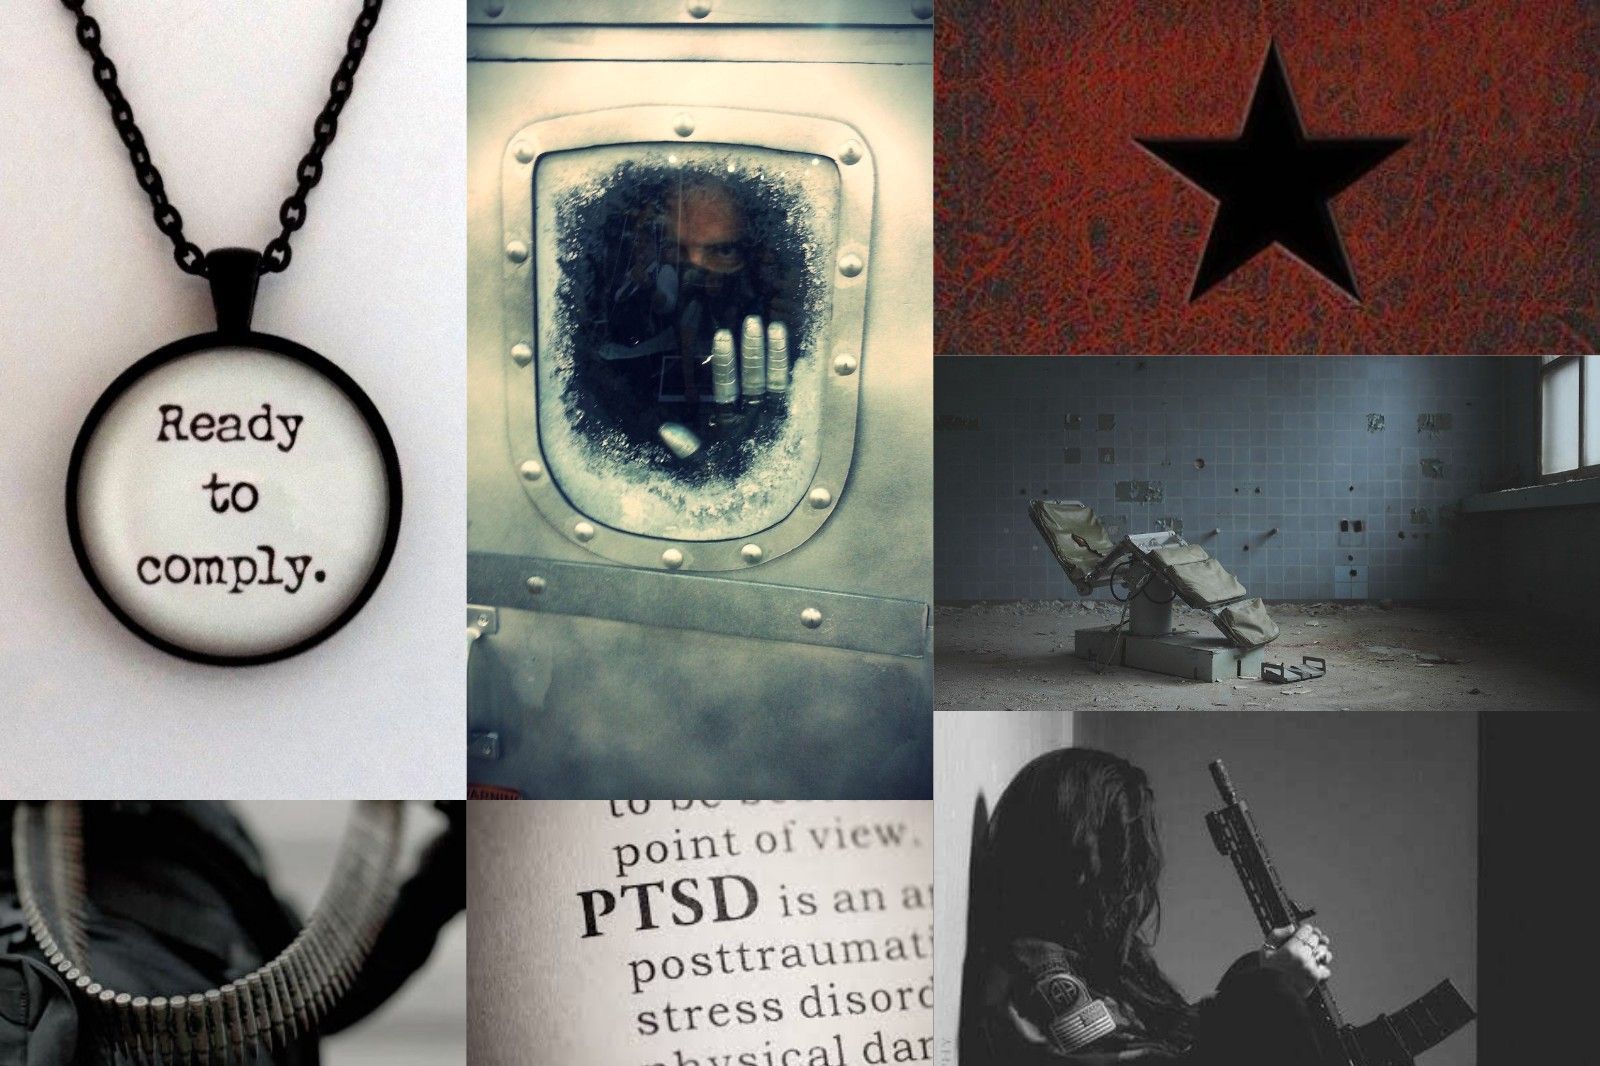 A collage of images including a necklace that says 